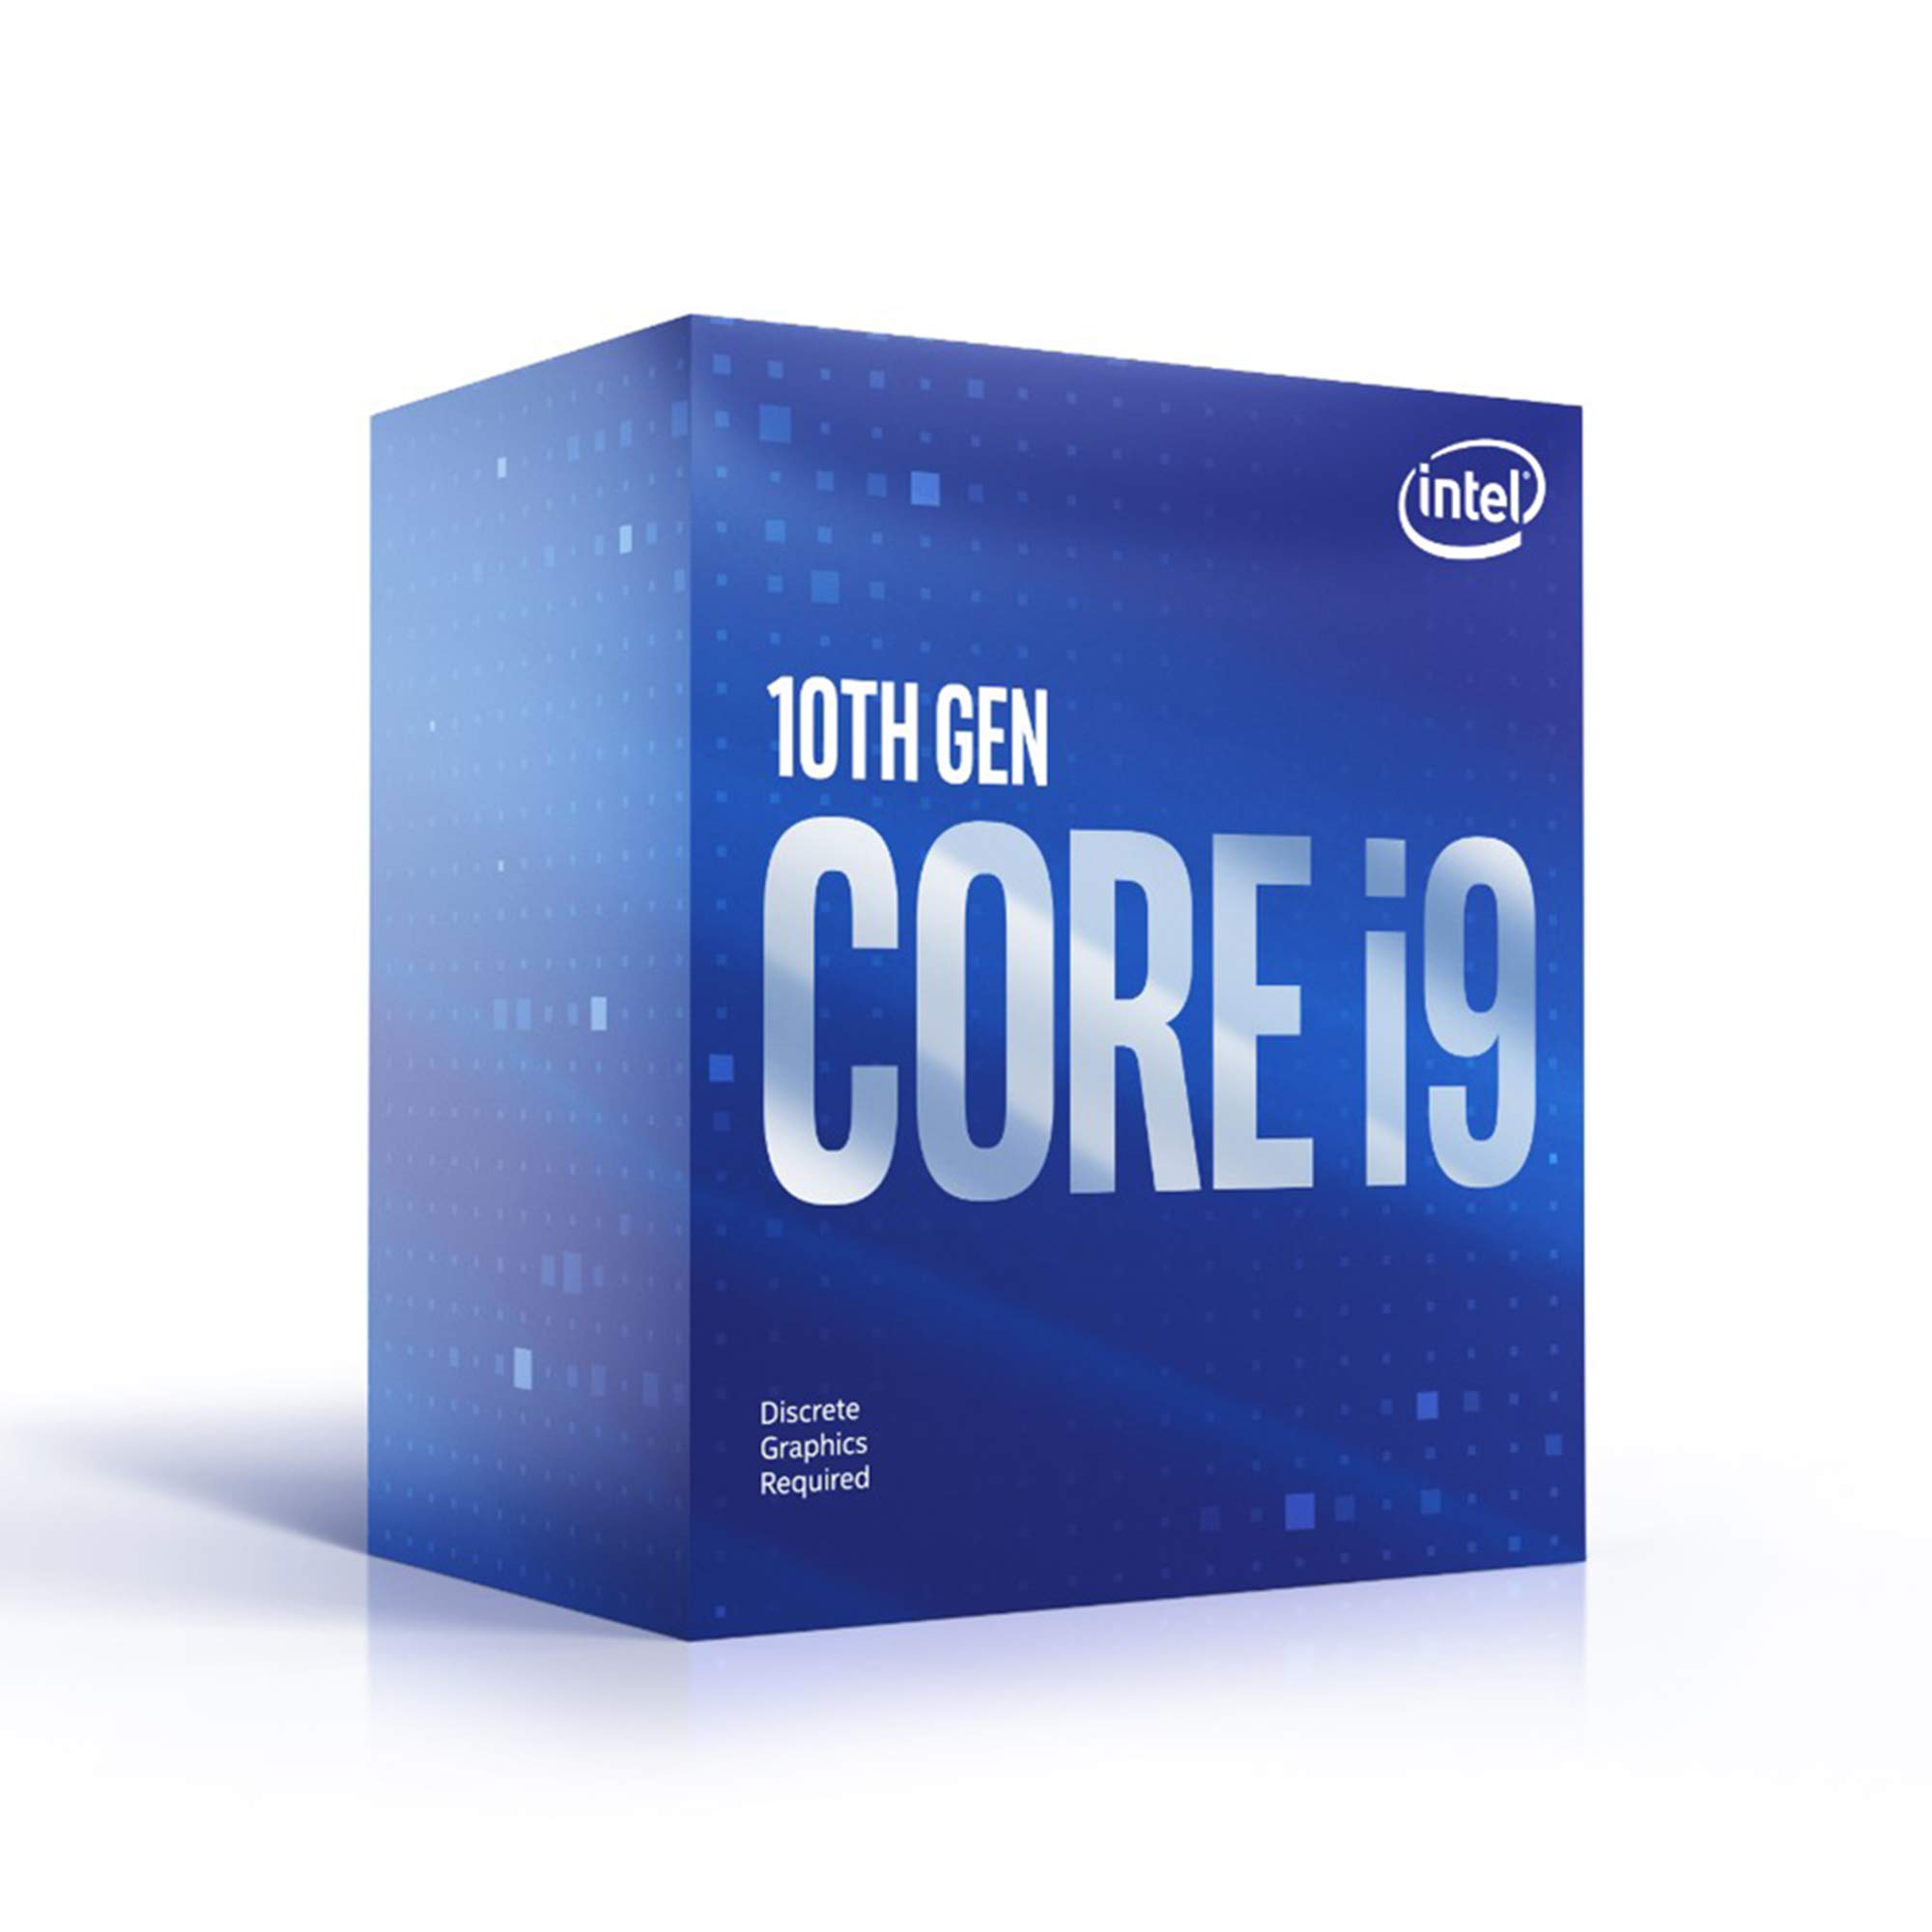 Intel Core i9-10900F Desktop Processor 10 Cores up to 5.2 GHz Without Processor Graphics LGA 1200 (Intel 400 Series chipset) 65W